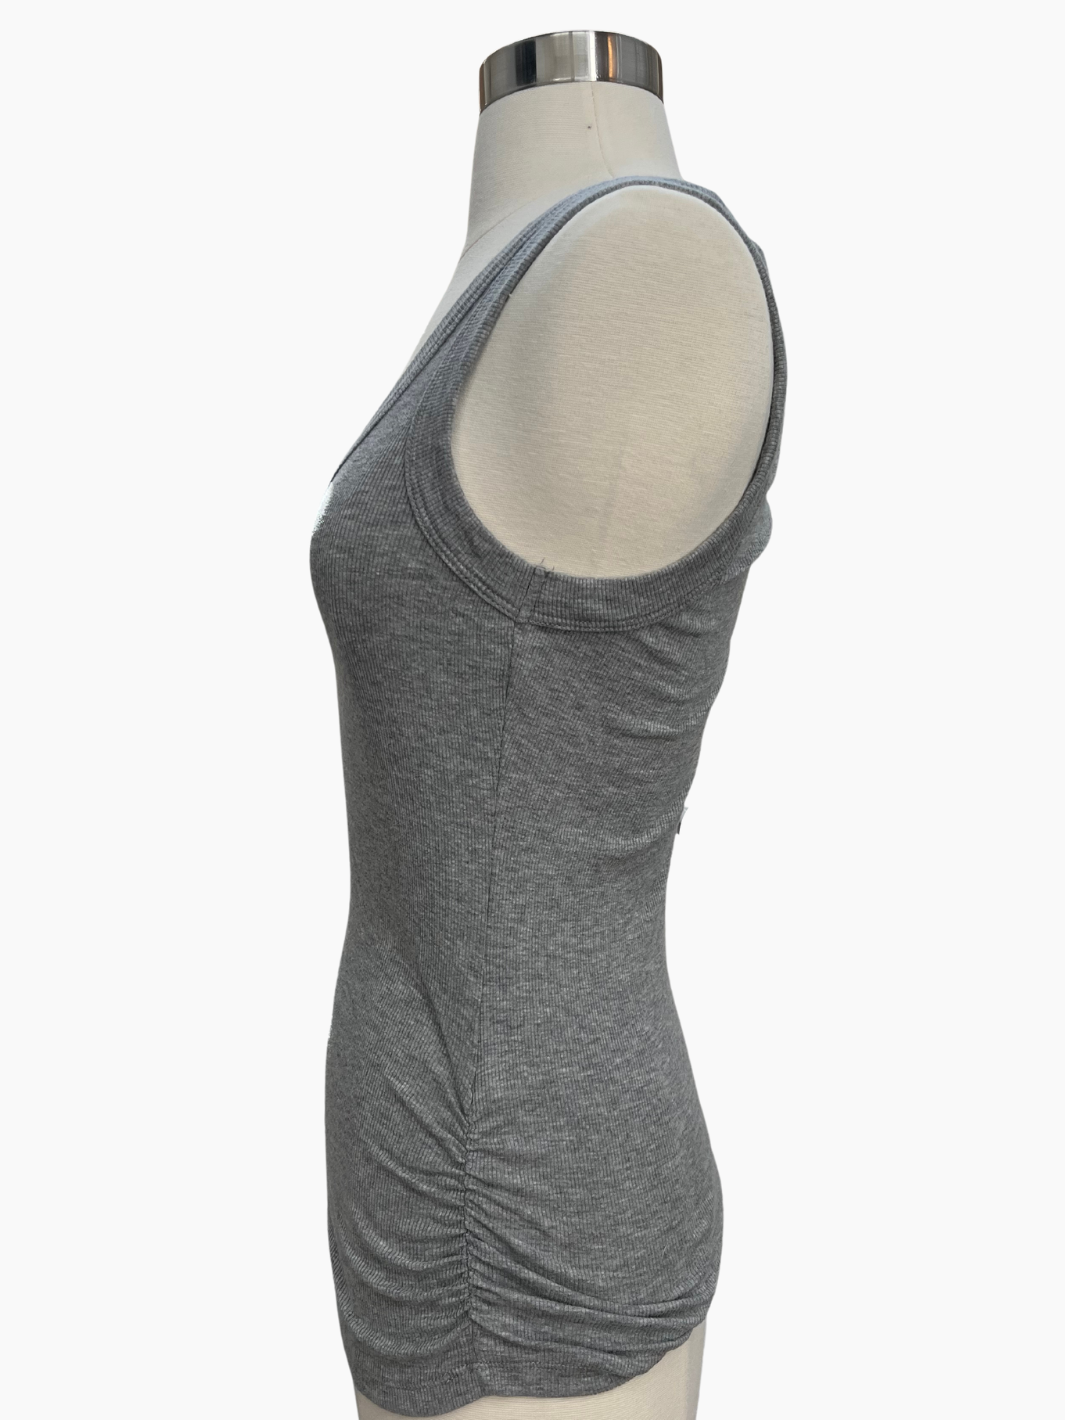 BLANCHE RUCHED SIDE TANK IN HEATHER GREY - Romi Boutique